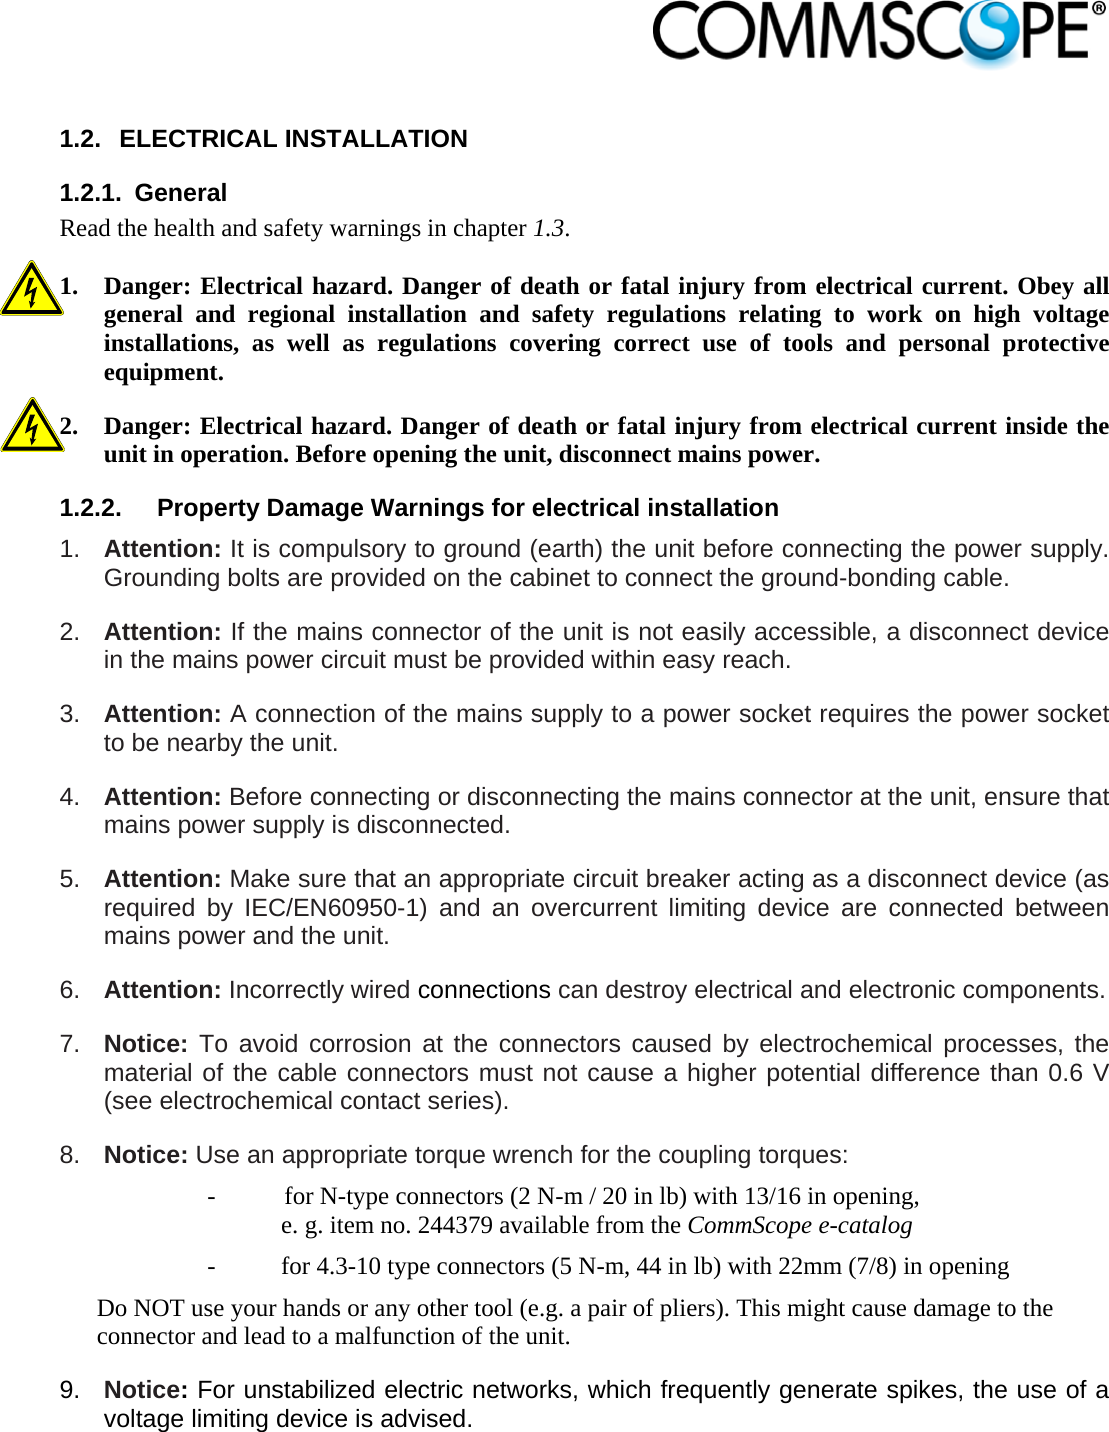                             1.2. ELECTRICAL INSTALLATION 1.2.1. General Read the health and safety warnings in chapter 1.3.  1. Danger: Electrical hazard. Danger of death or fatal injury from electrical current. Obey all general and regional installation and safety regulations relating to work on high voltage installations, as well as regulations covering correct use of tools and personal protective equipment. 2. Danger: Electrical hazard. Danger of death or fatal injury from electrical current inside the unit in operation. Before opening the unit, disconnect mains power. 1.2.2.  Property Damage Warnings for electrical installation 1.  Attention: It is compulsory to ground (earth) the unit before connecting the power supply. Grounding bolts are provided on the cabinet to connect the ground-bonding cable. 2.  Attention: If the mains connector of the unit is not easily accessible, a disconnect device in the mains power circuit must be provided within easy reach. 3.  Attention: A connection of the mains supply to a power socket requires the power socket to be nearby the unit. 4.  Attention: Before connecting or disconnecting the mains connector at the unit, ensure that mains power supply is disconnected. 5.  Attention: Make sure that an appropriate circuit breaker acting as a disconnect device (as required by IEC/EN60950-1) and an overcurrent limiting device are connected between mains power and the unit. 6.  Attention: Incorrectly wired connections can destroy electrical and electronic components.  7.  Notice: To avoid corrosion at the connectors caused by electrochemical processes, the material of the cable connectors must not cause a higher potential difference than 0.6 V (see electrochemical contact series). 8.  Notice: Use an appropriate torque wrench for the coupling torques:   -  for N-type connectors (2 N-m / 20 in lb) with 13/16 in opening,  e. g. item no. 244379 available from the CommScope e-catalog -  for 4.3-10 type connectors (5 N-m, 44 in lb) with 22mm (7/8) in opening Do NOT use your hands or any other tool (e.g. a pair of pliers). This might cause damage to the connector and lead to a malfunction of the unit. 9.  Notice: For unstabilized electric networks, which frequently generate spikes, the use of a voltage limiting device is advised. 